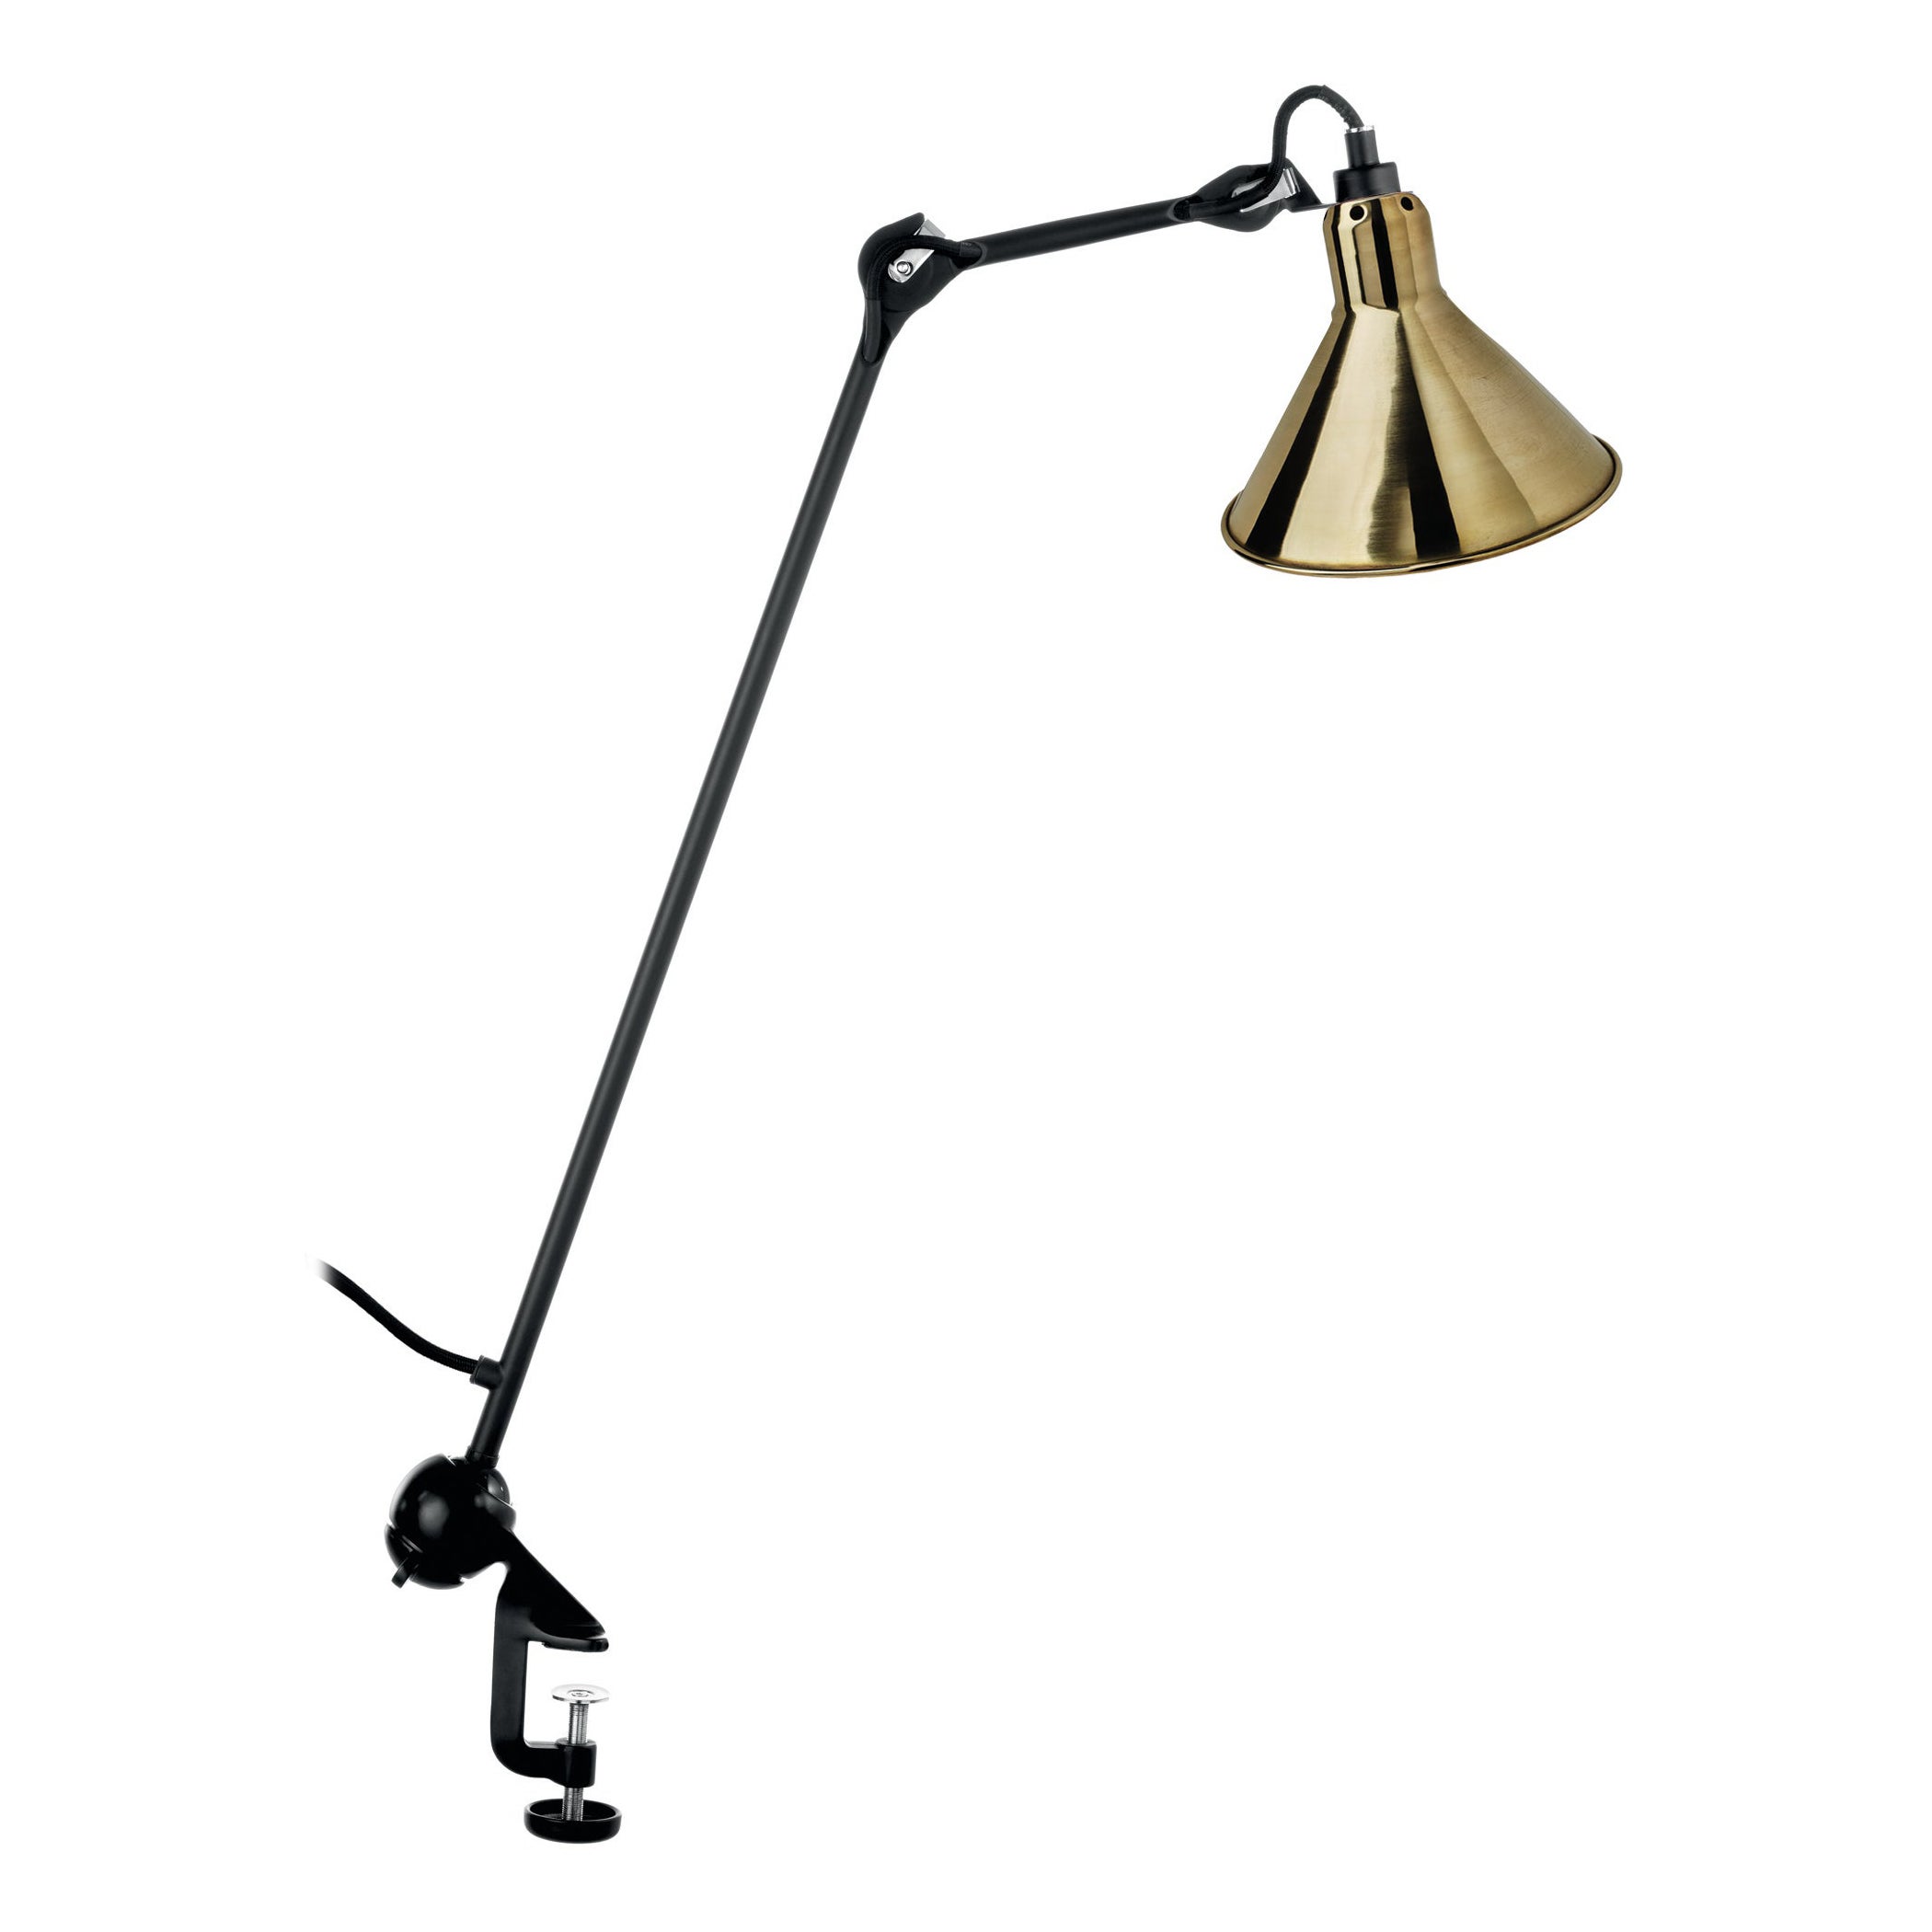 DCW Editions La Lampe Gras N°201 Conic Table Lamp in Black Arm and Brass Shade For Sale